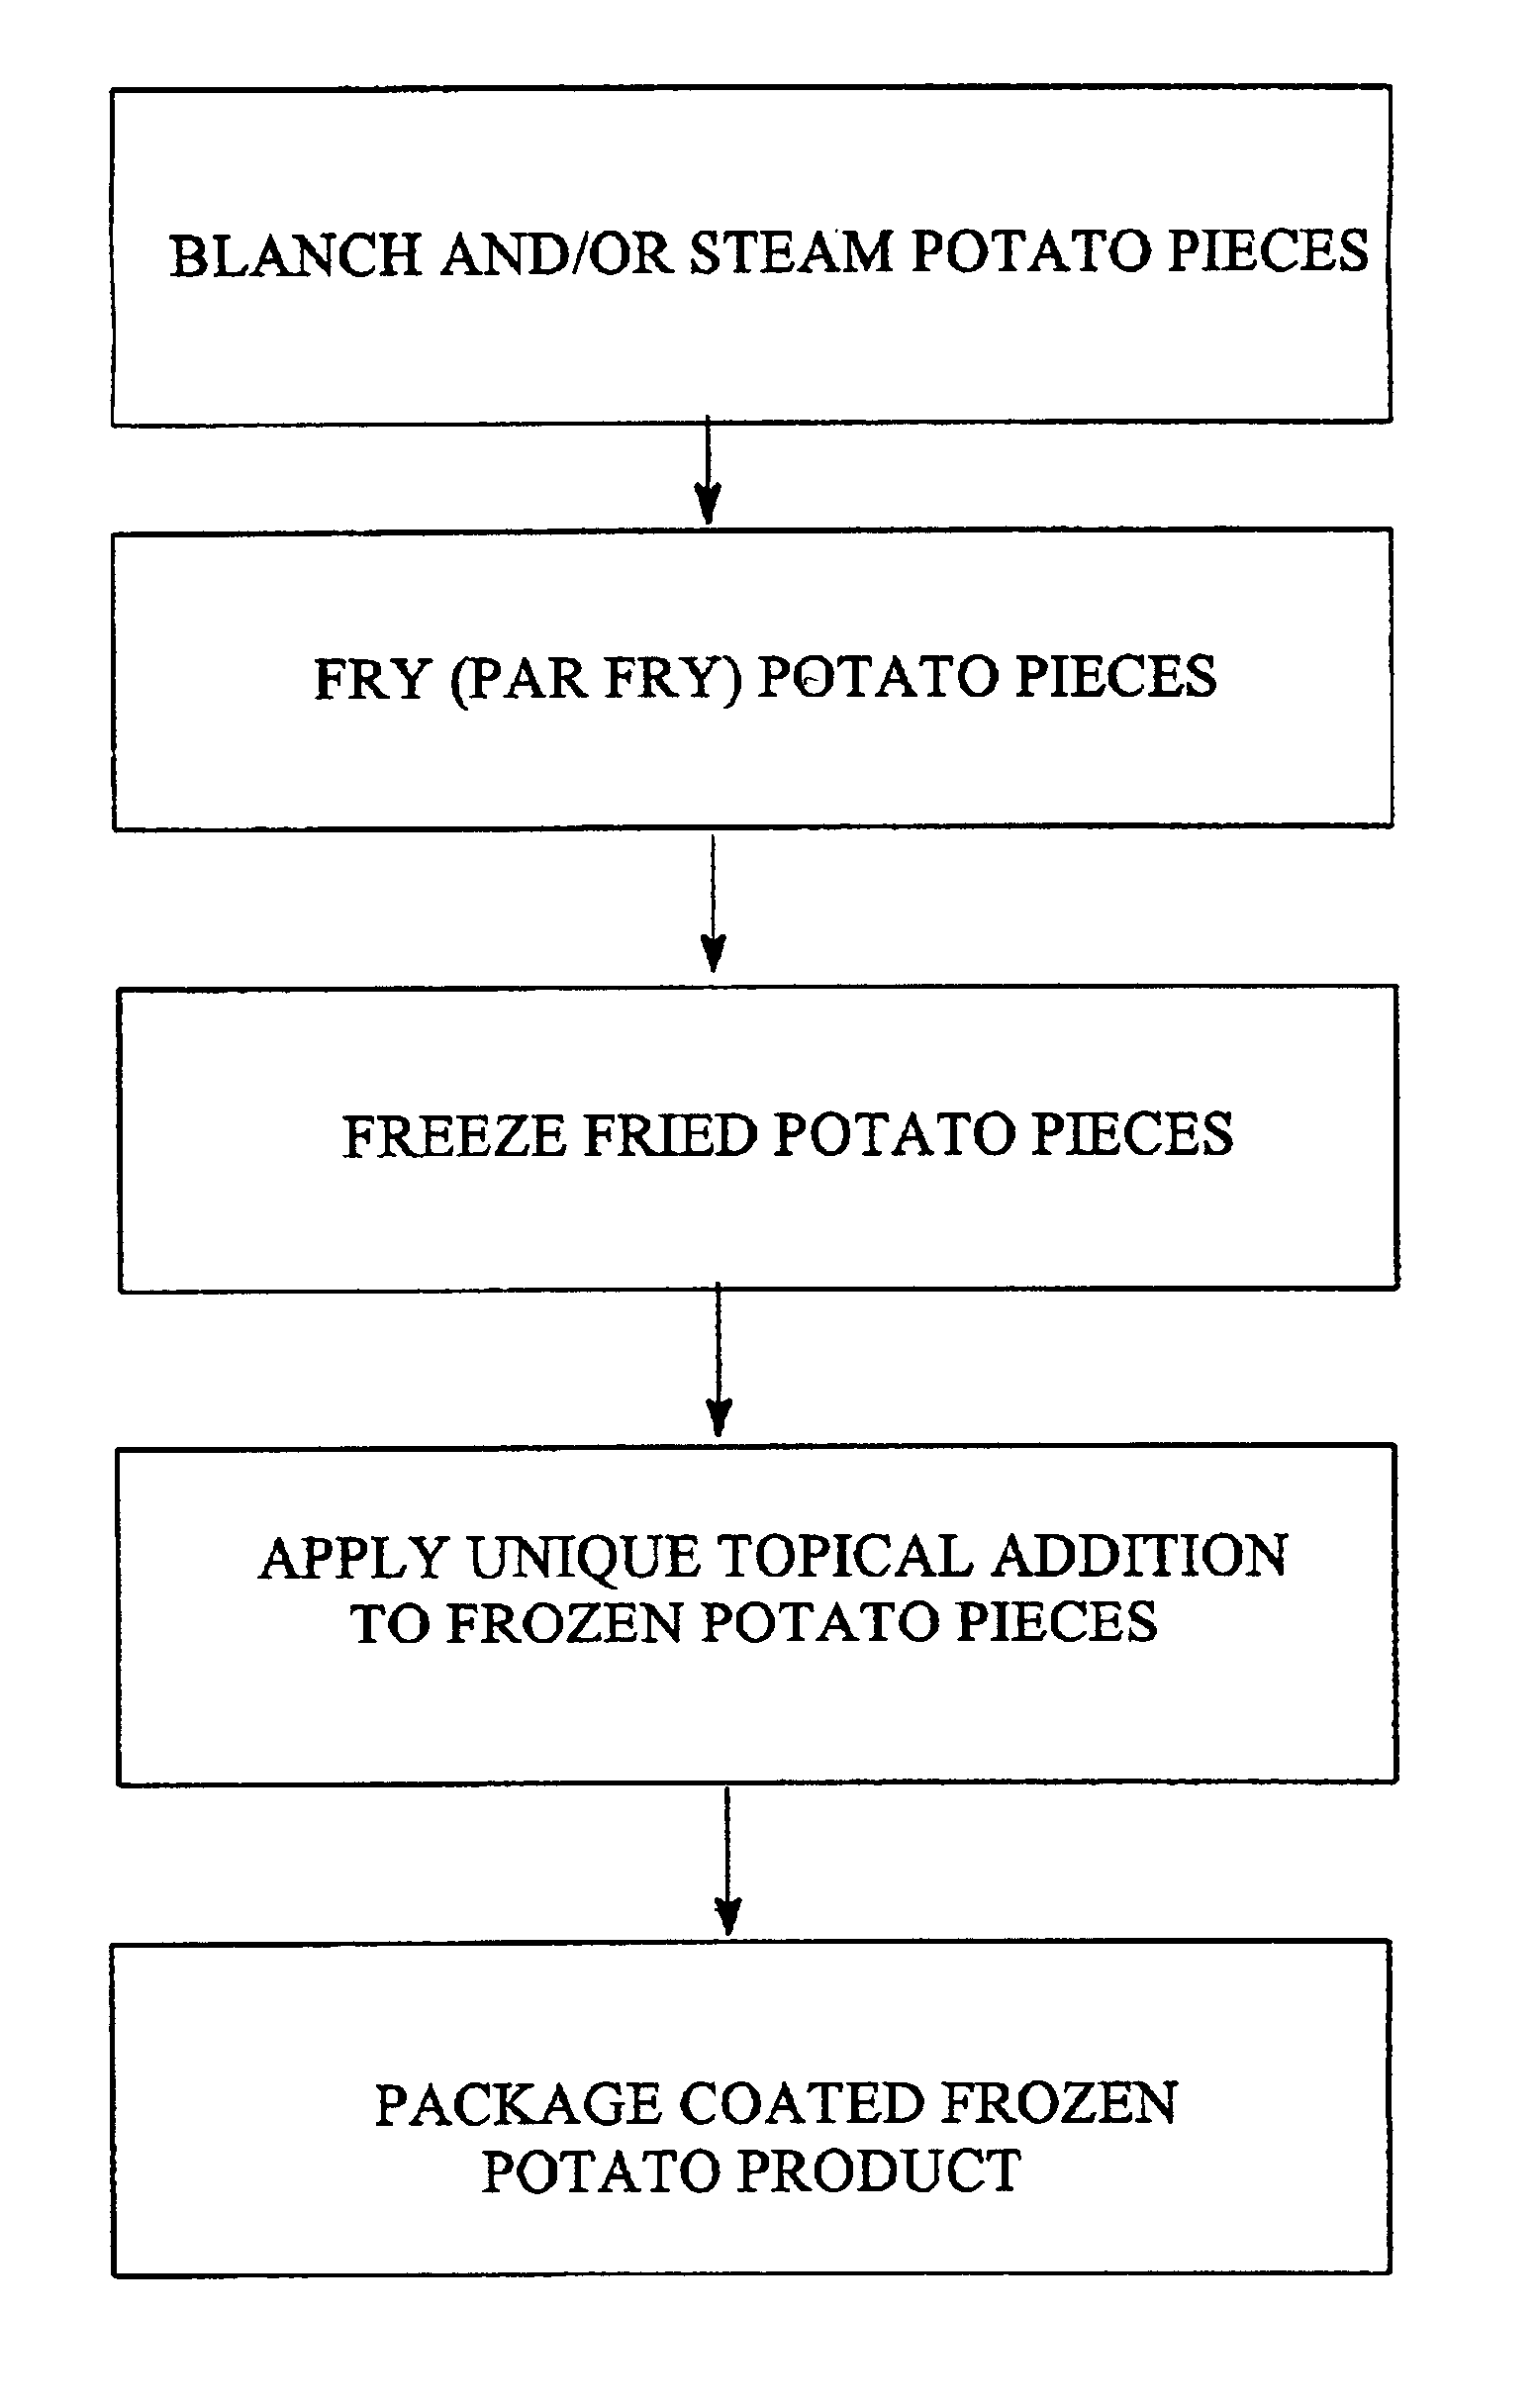 Process of preparing frozen french fried potato product